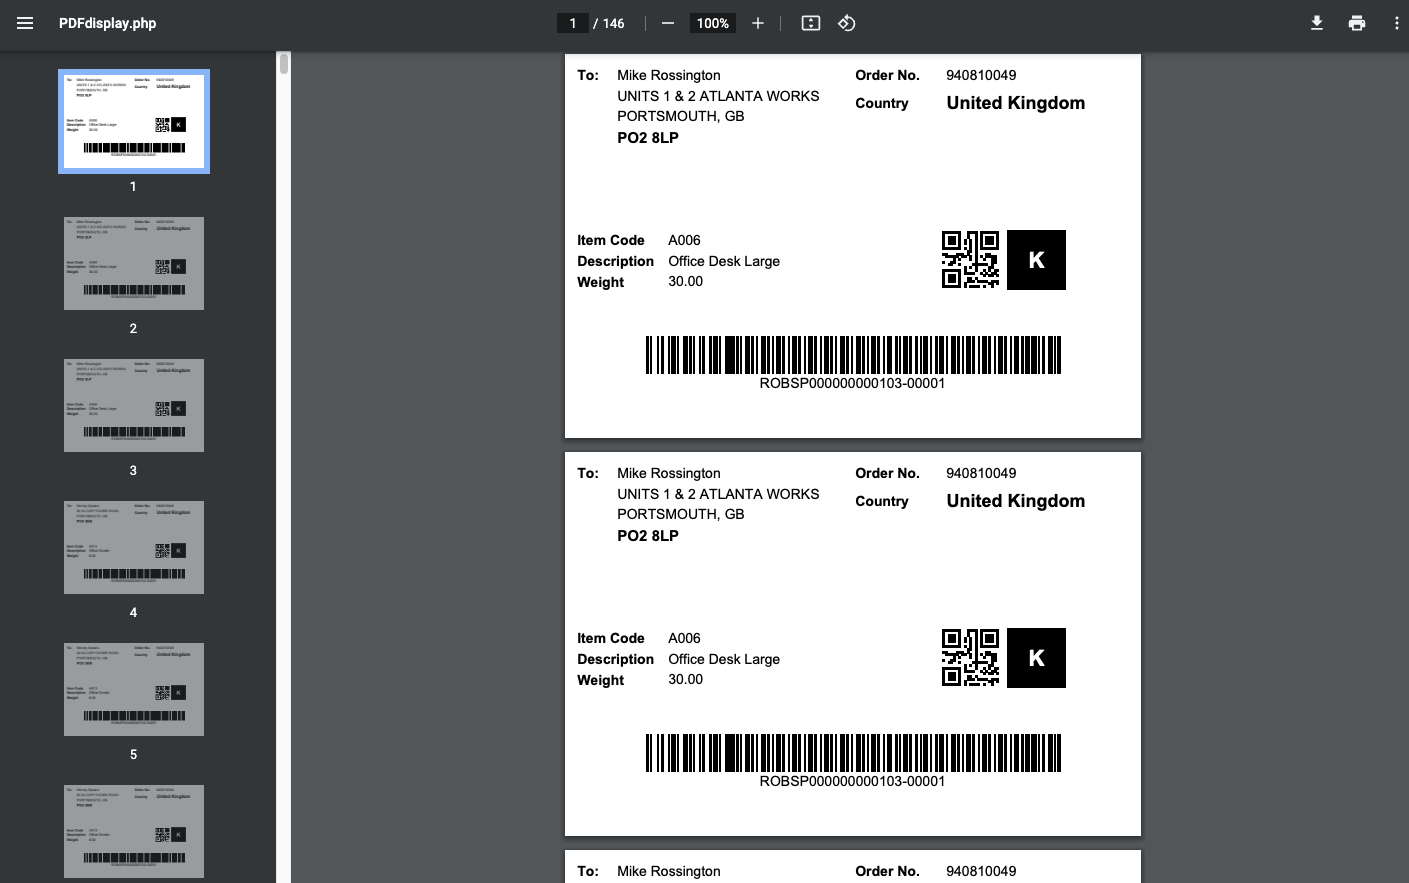 5.Printable-Labels-Appear-in-Popup-Window-to-print-or-download